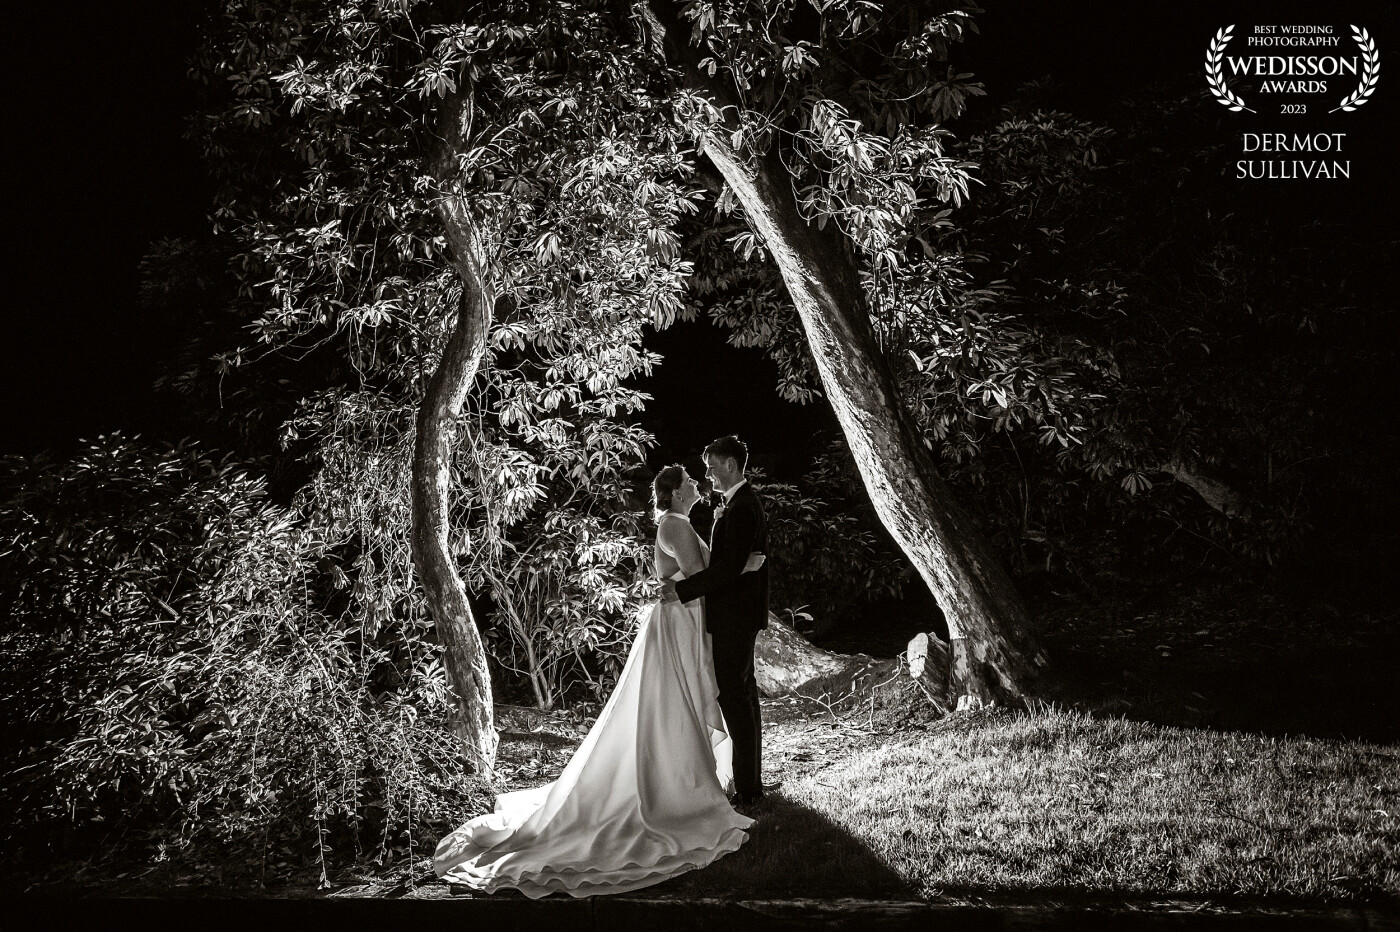 This photograph was taken in the break between dinner and the first dance. I scouted out the location in the grounds of The Maryborough Hotel in Cork, Ireland and I felt that the two trees would make a good frame for my couple. I had one flash behind them and another one at a lower power in front. after a few test shots, I got the levels right and the photograph was done.